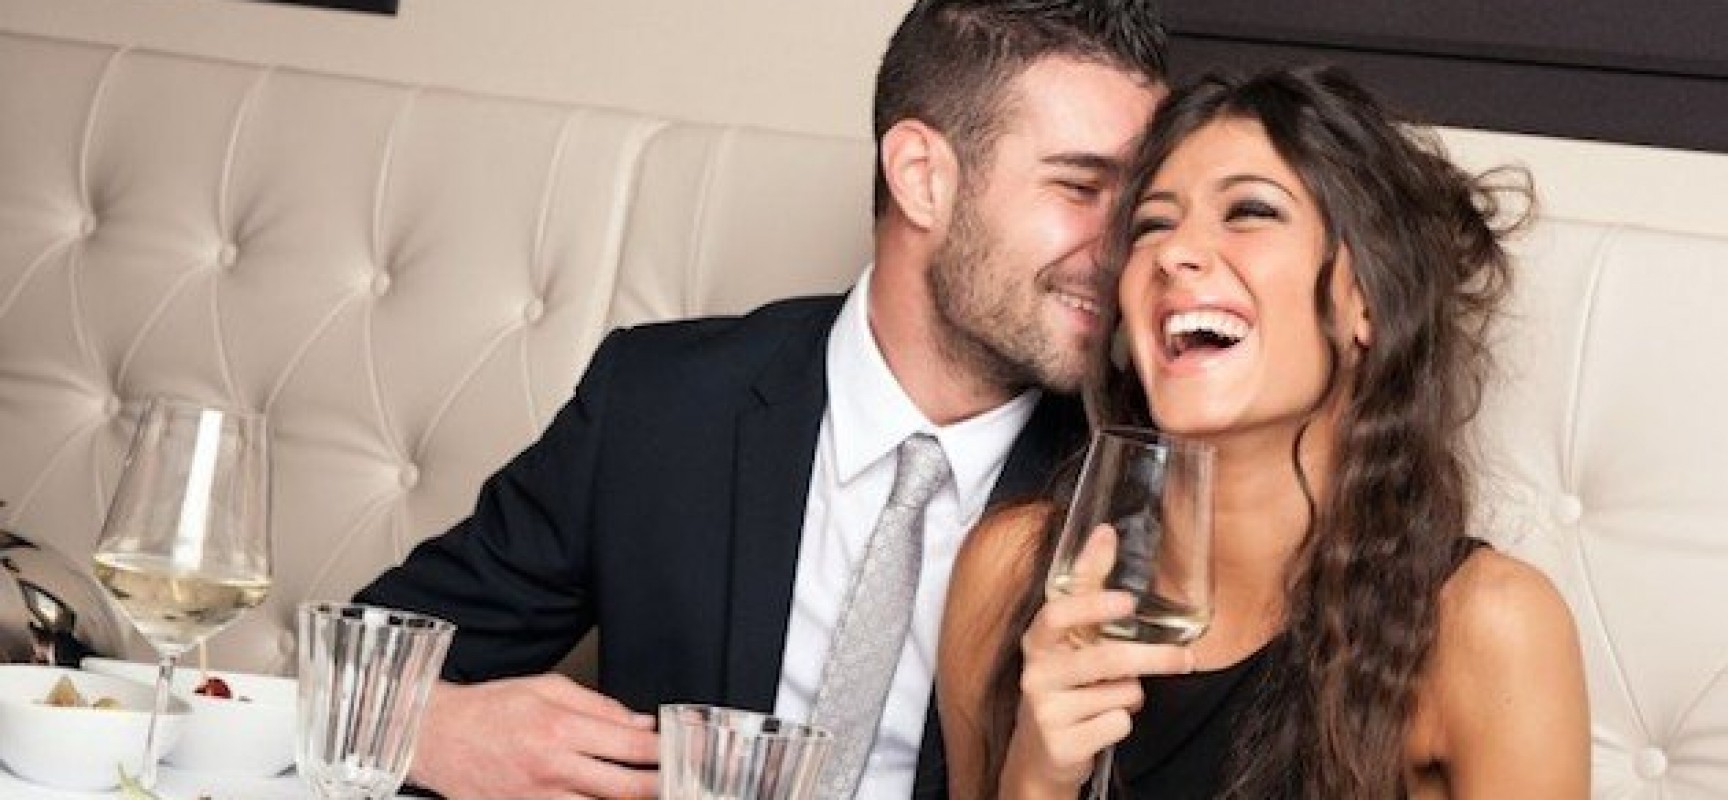 10 Pointers to keep in Mind for a First Date